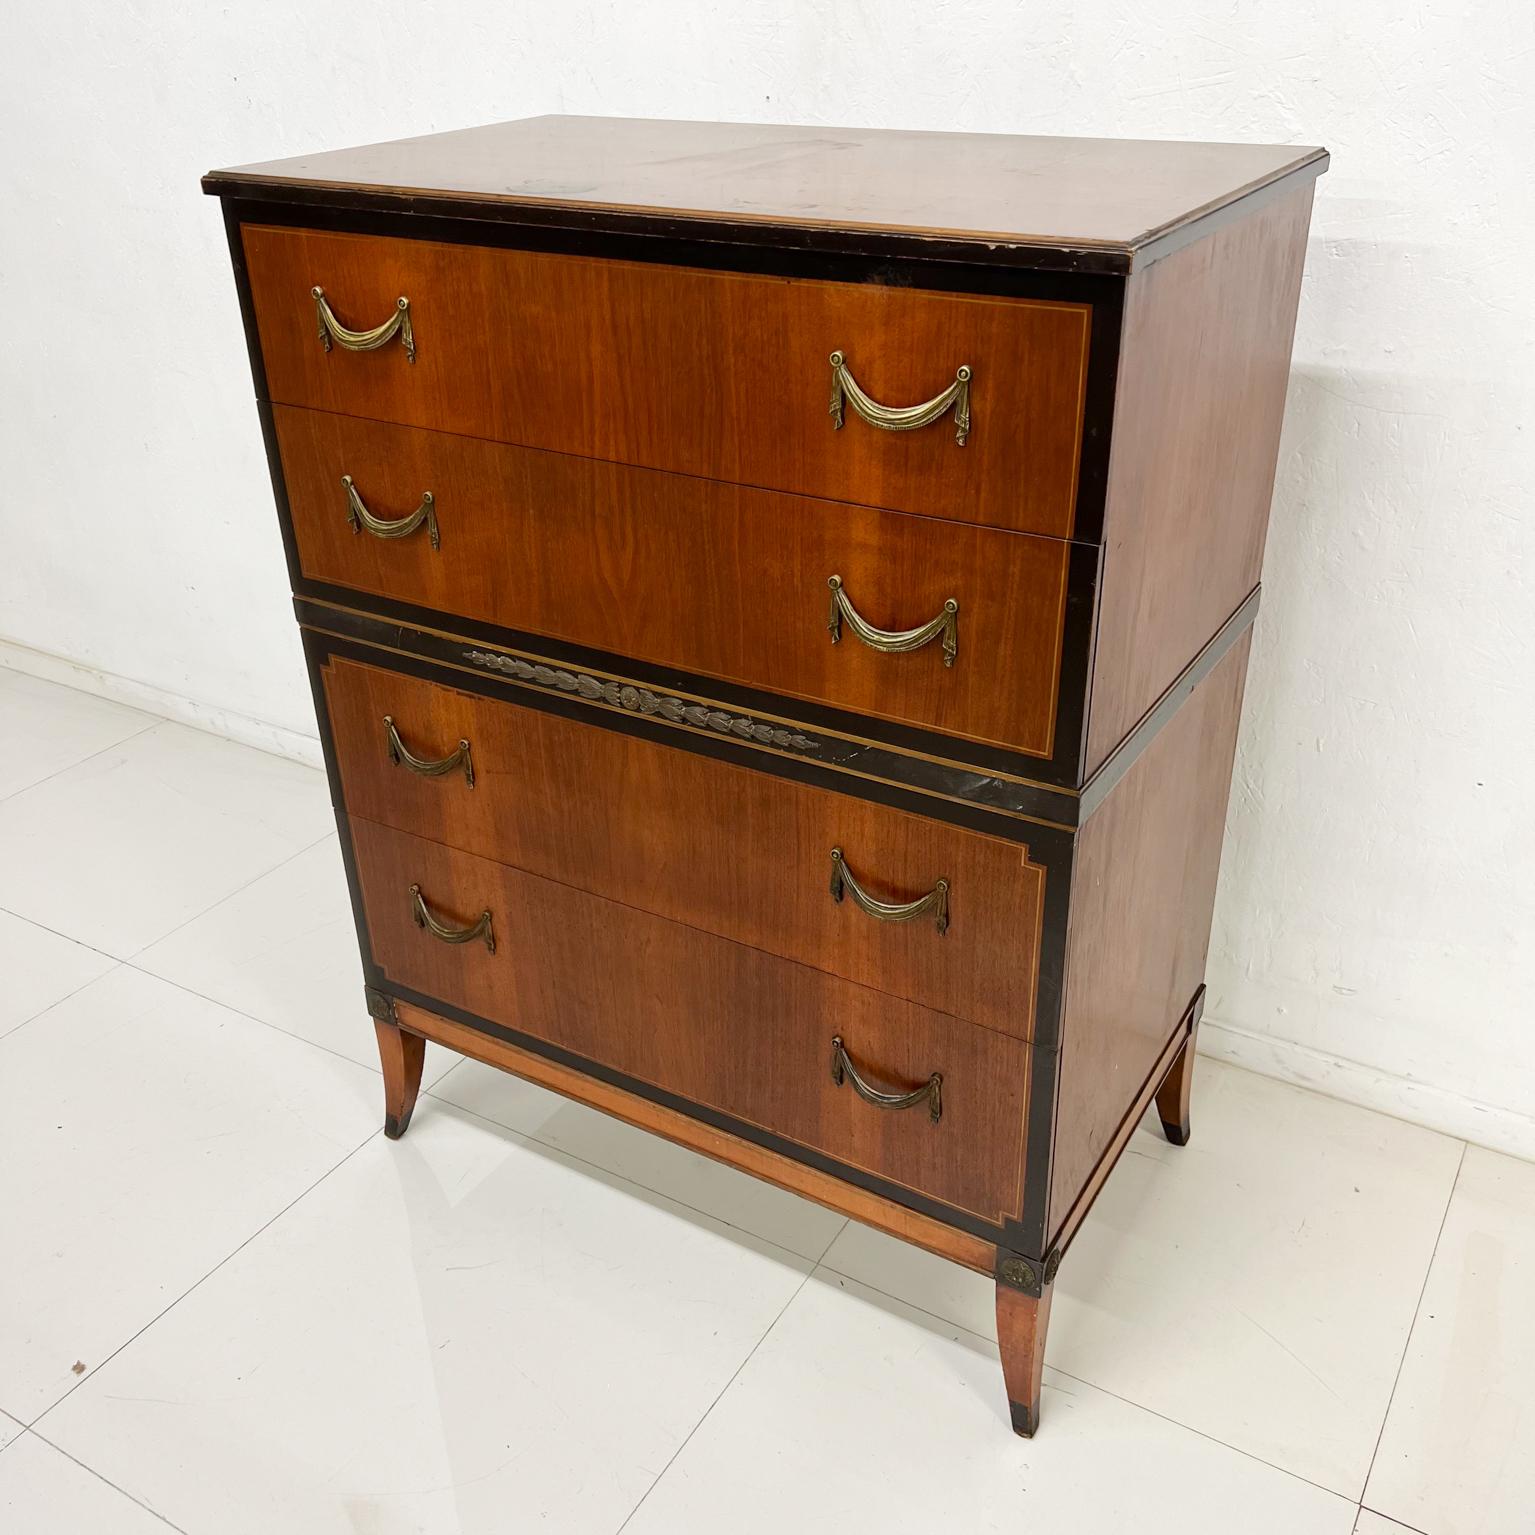 1950s Mid-century elegant Landstrom Furniture highboy dresser Illinois
Vintage Landstrom chest of drawers. Fair condition.
Original vintage unrestored condition. Top has some water stains. 
Finish has some wear.
Neoclassical lines original brass